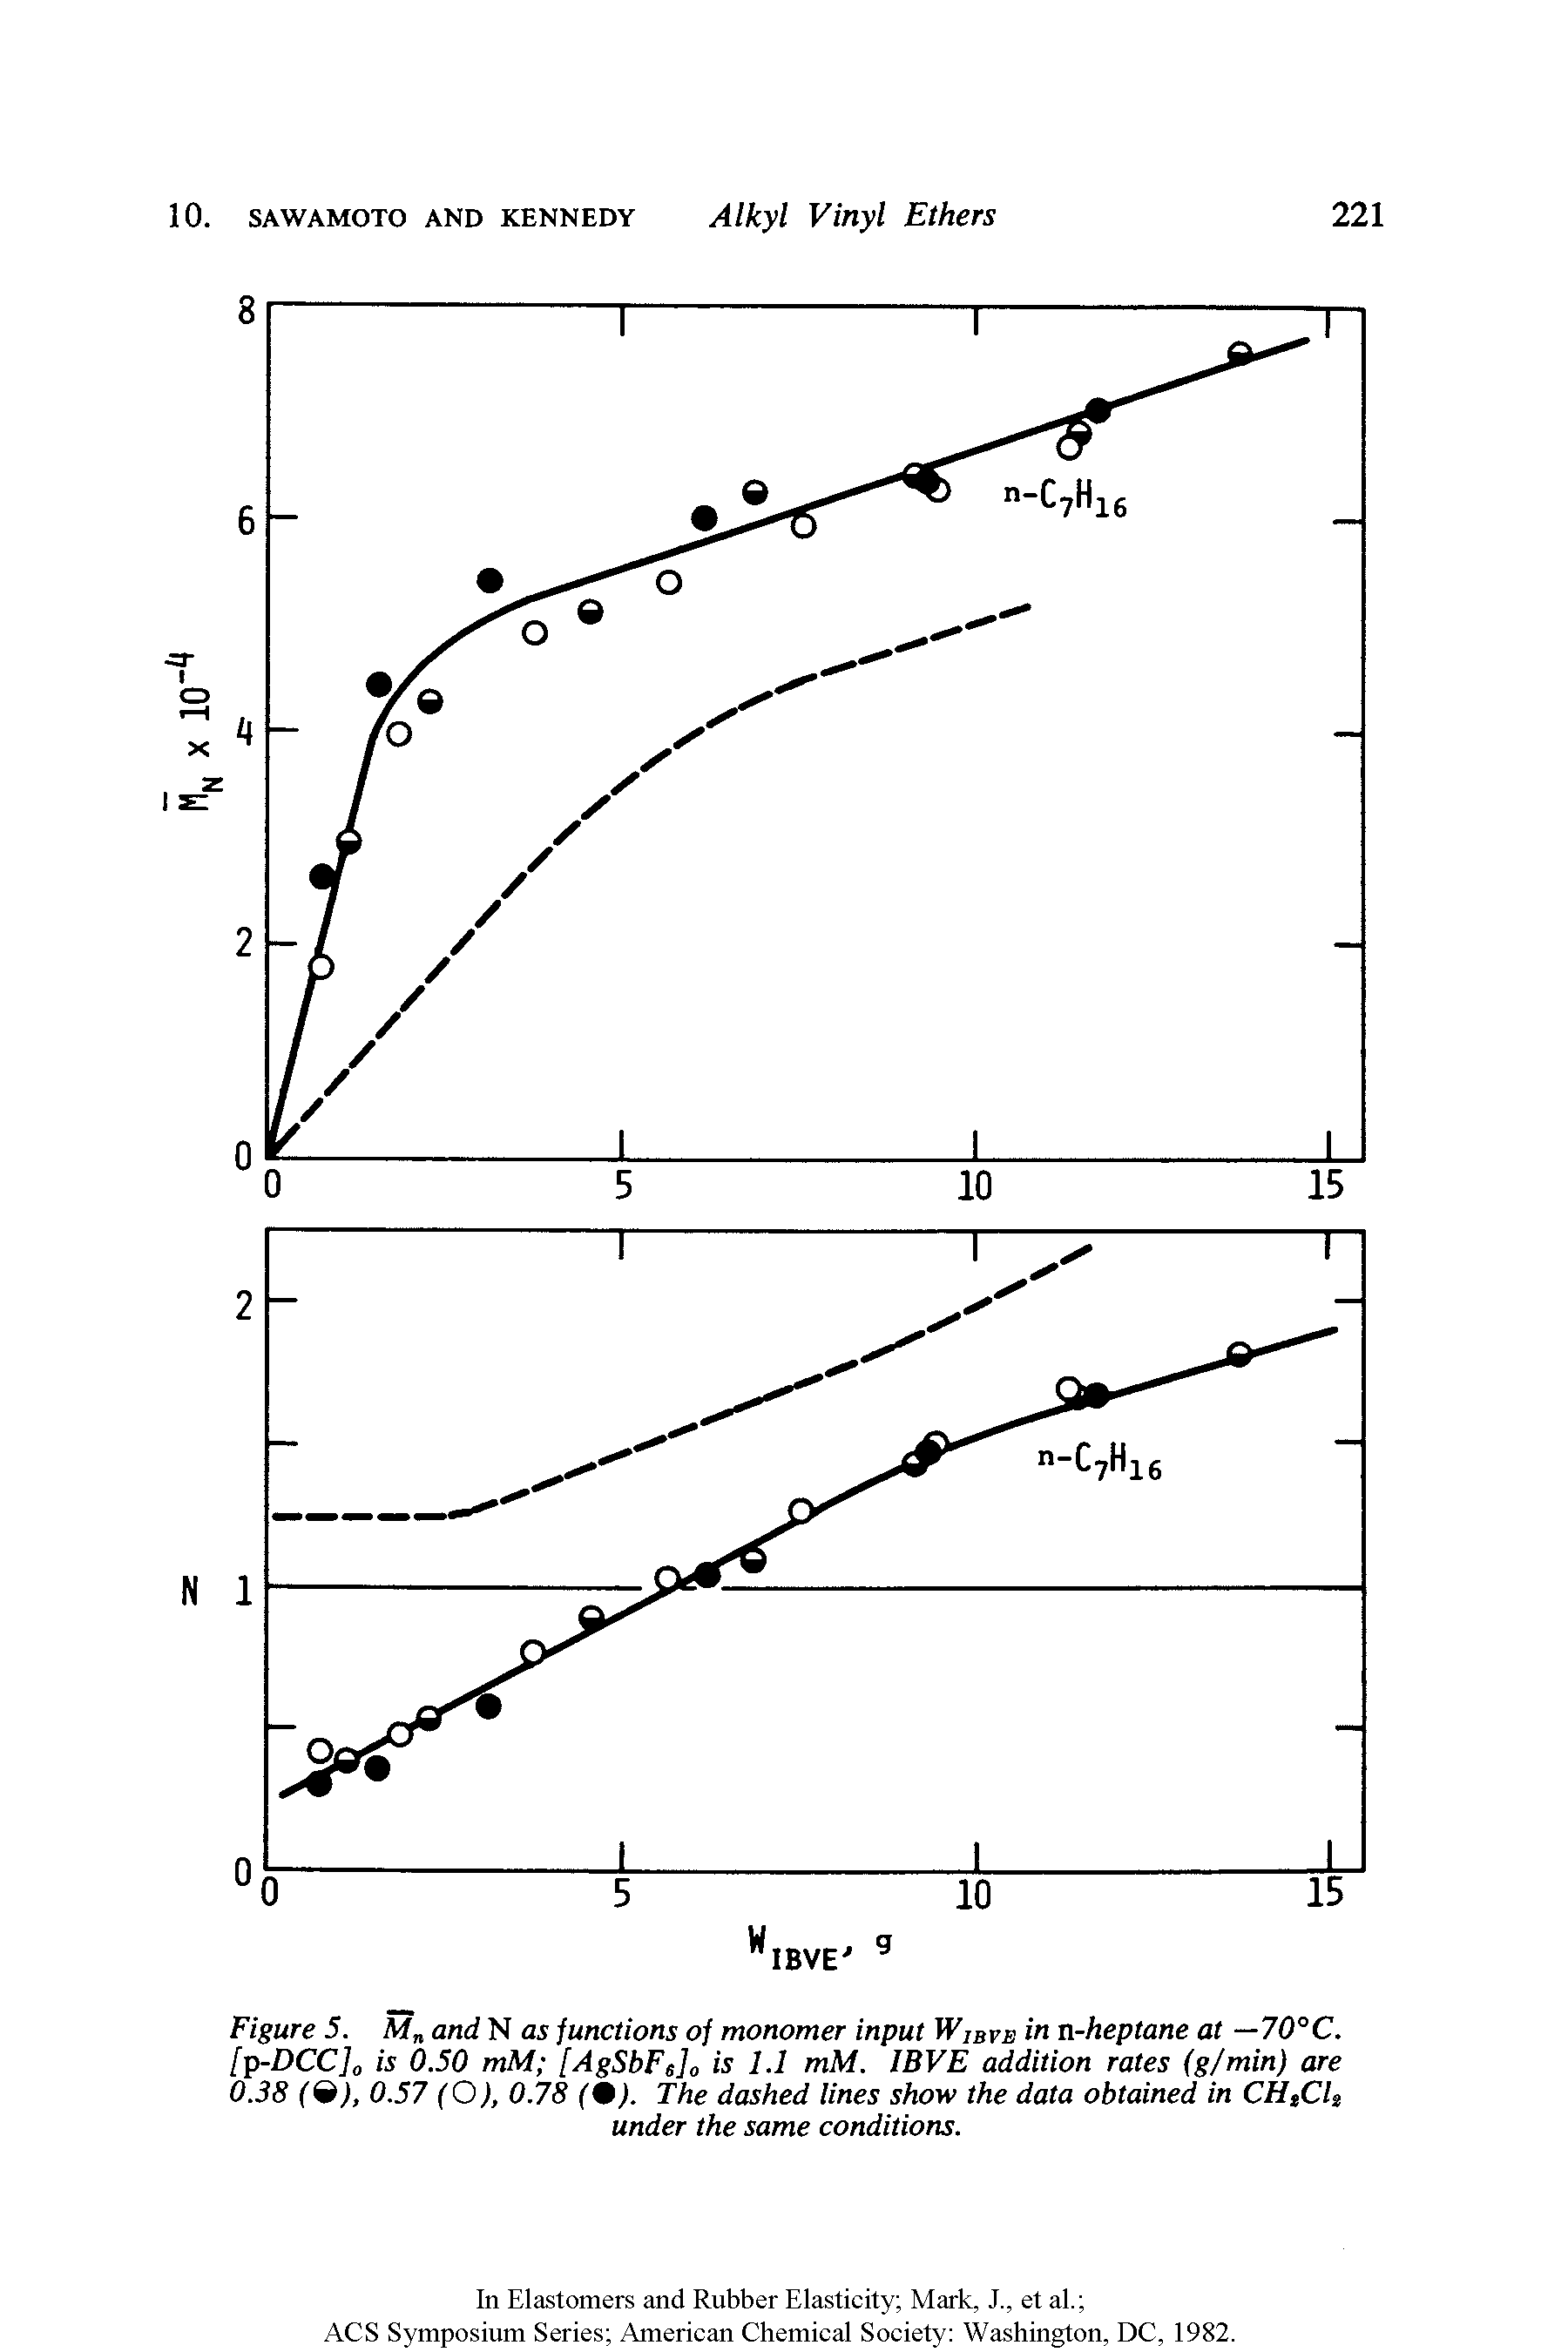 Figure 5. Mn and N as functions of monomer input WIBve in n-heptane at —70°C. [p-DCC]0 is 0.50 mM [AgSbFs]0 is 1.1 mM. 1BVE addition rates (g/min) are 0.38 (9), 0.57 (O), 0.78 (9). The dashed lines show the data obtained in CHtCU under the same conditions.